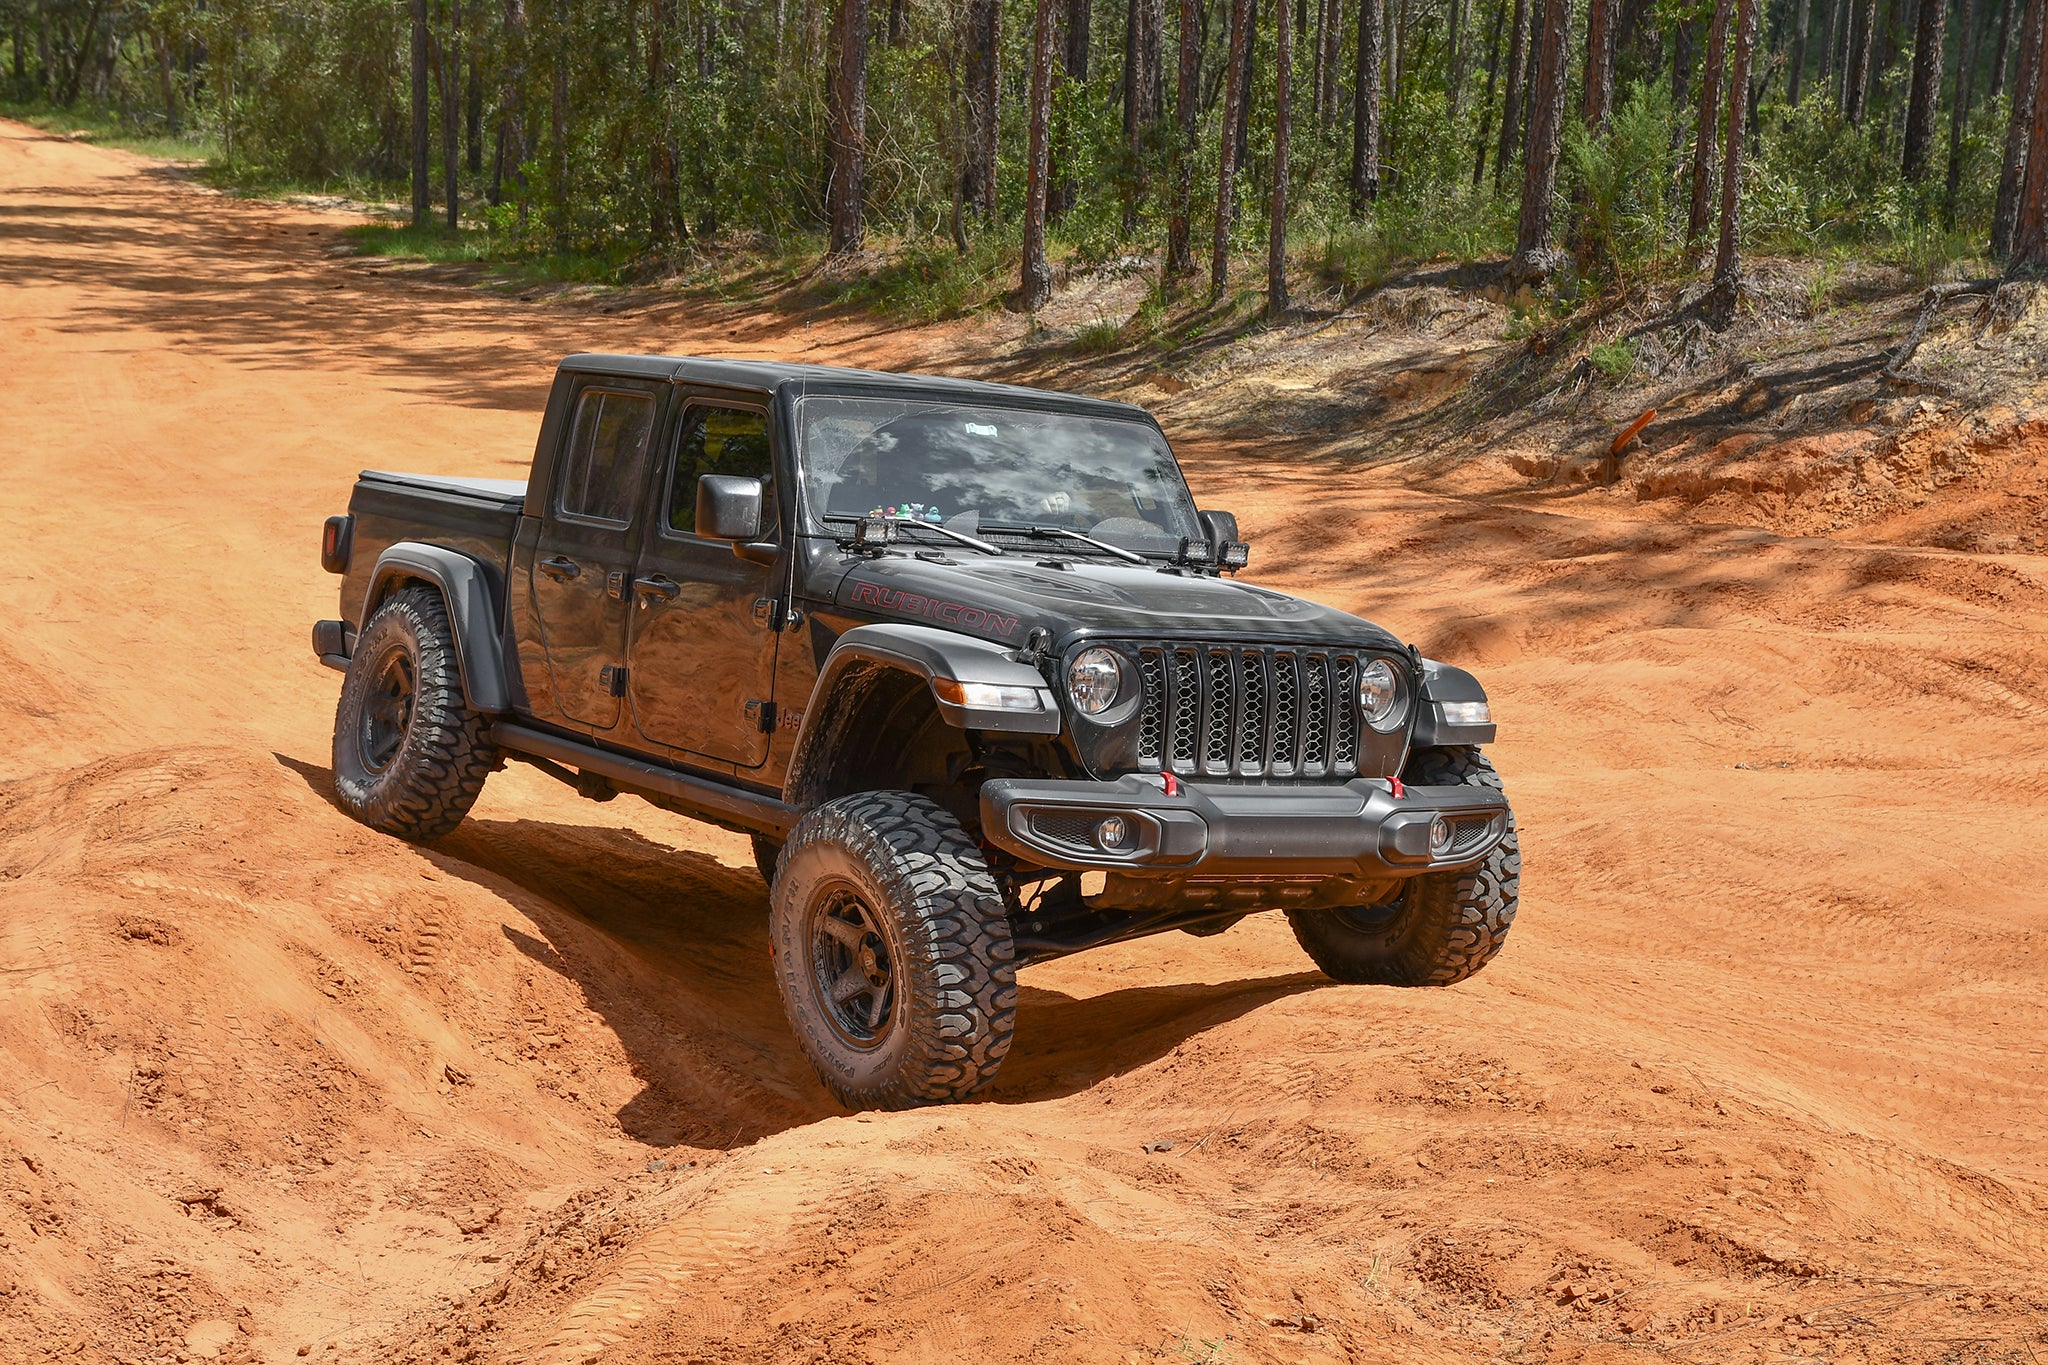 overland sector wheels jeep gladiator rubicon on 17x9 satin black atlas wheels on clay red dirt trail in woods